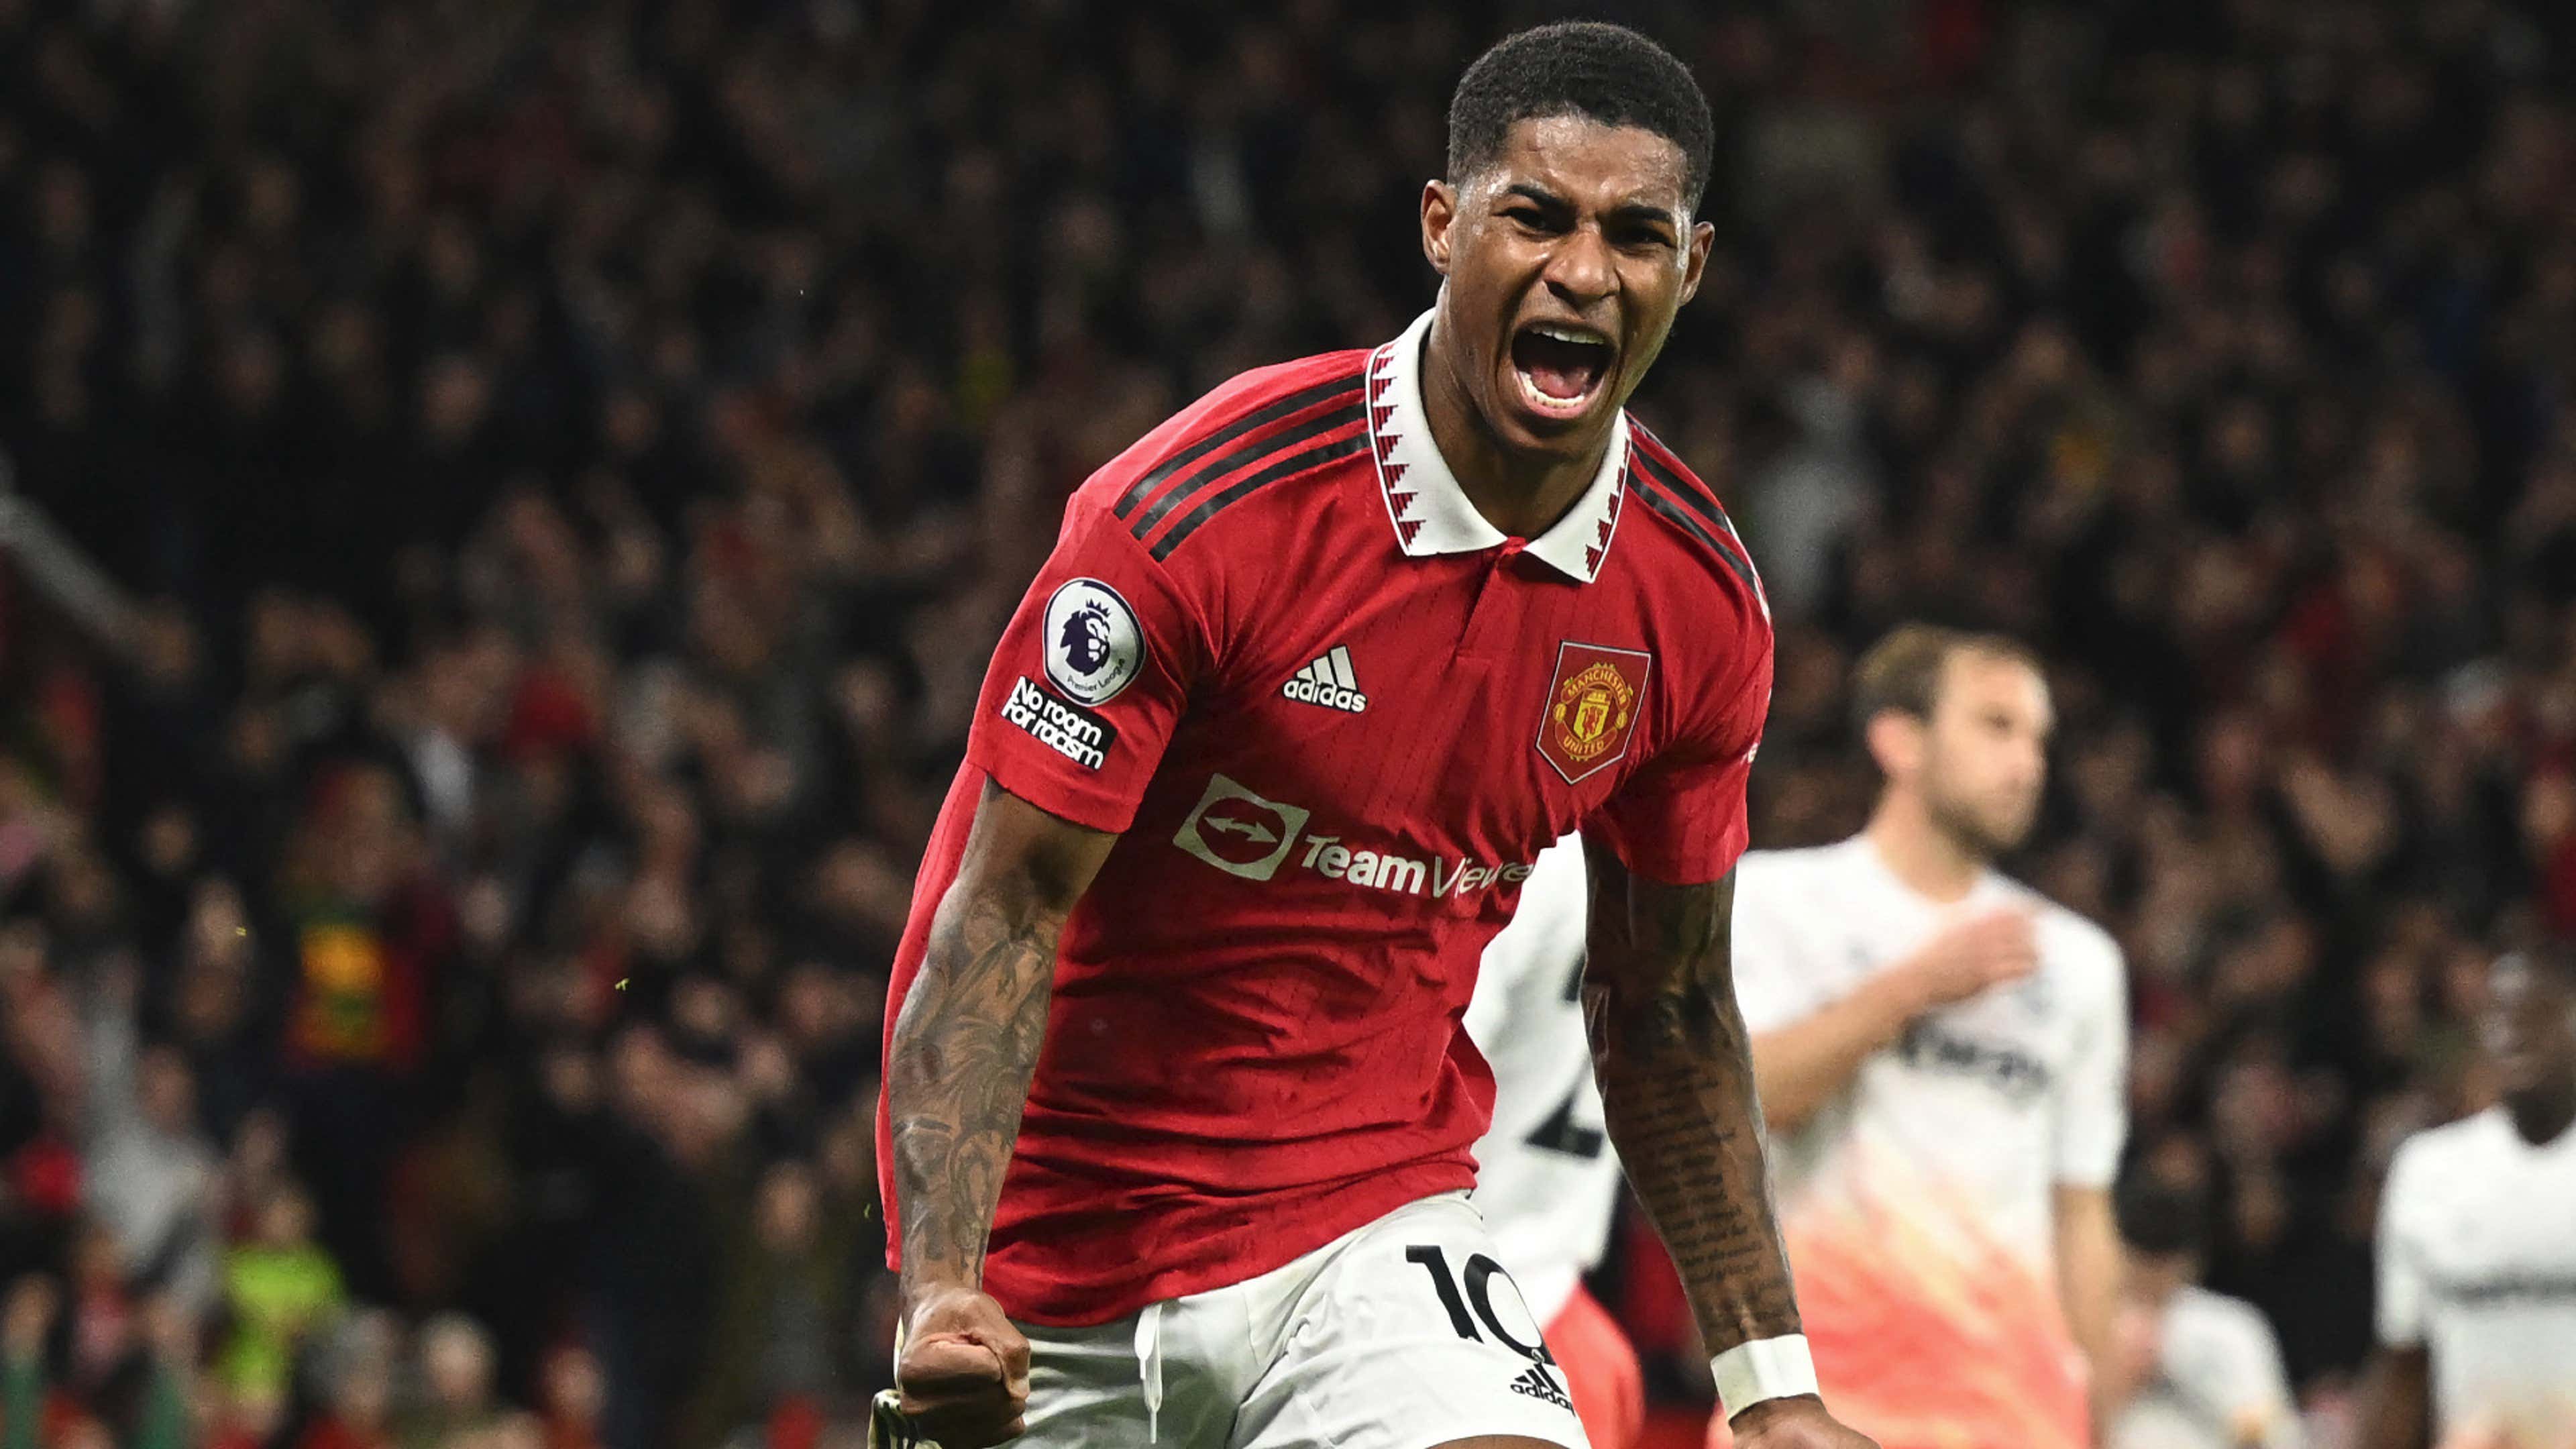 He's going to be one of the best players in the world' - Evra backs  Rashford to reach new heights after netting 100th Man Utd goal | Goal.com